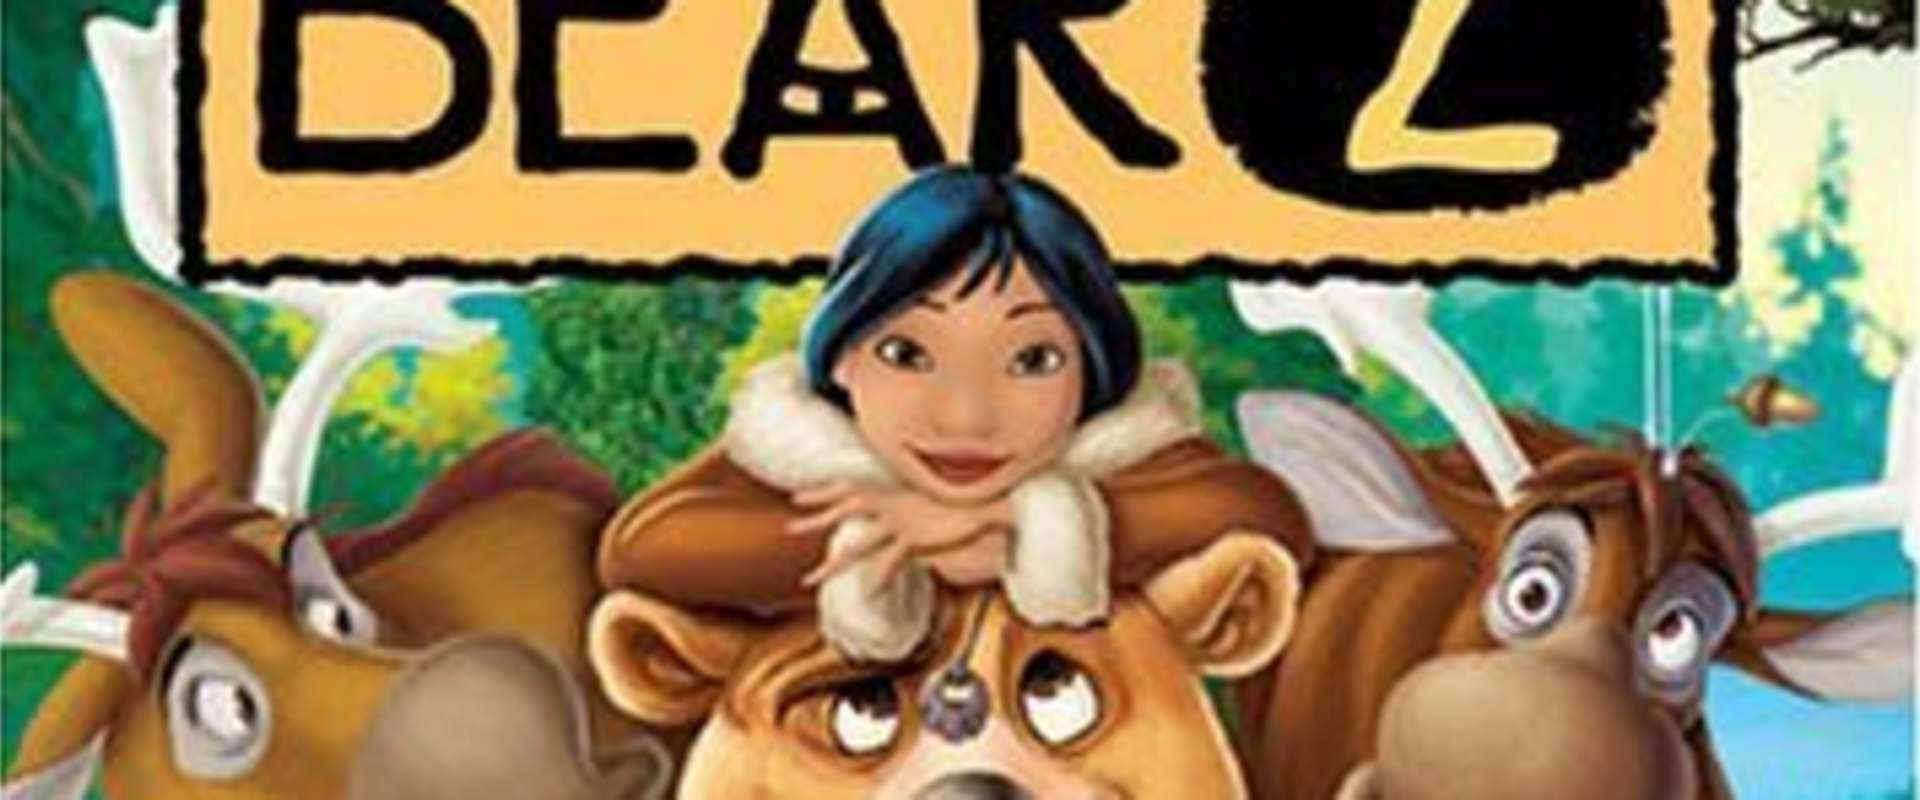 Brother Bear 2 background 2